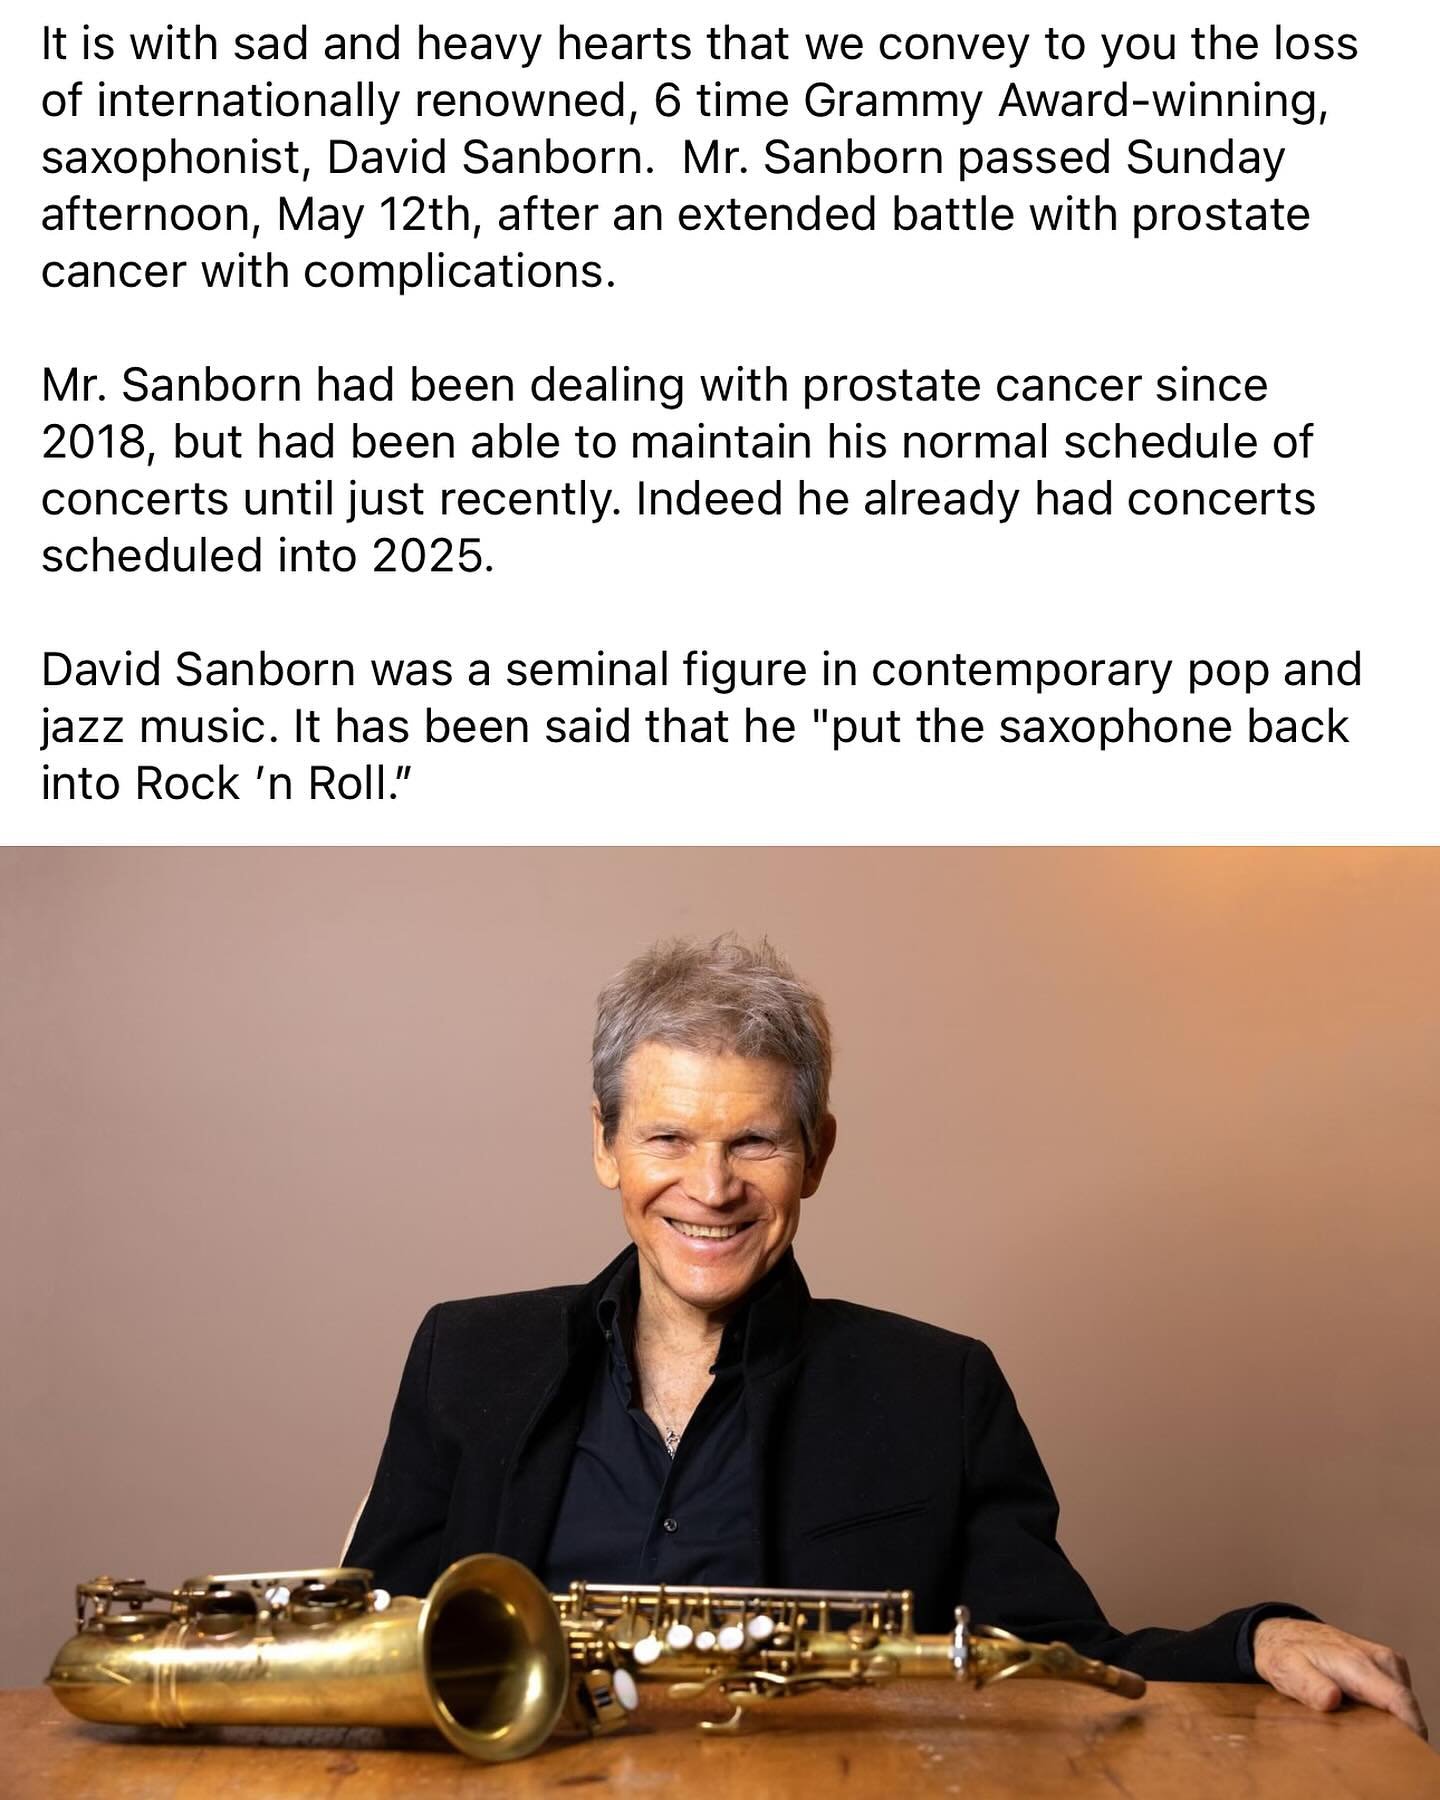 Final thought as I attempt to capture sleep tonight:
My first celebrity crush, the person who made me fall in love with the alto sax. I wanted so badly to sound like him.. I&rsquo;m heartbroken. This year has been one of profound loss&mdash;
 
David 